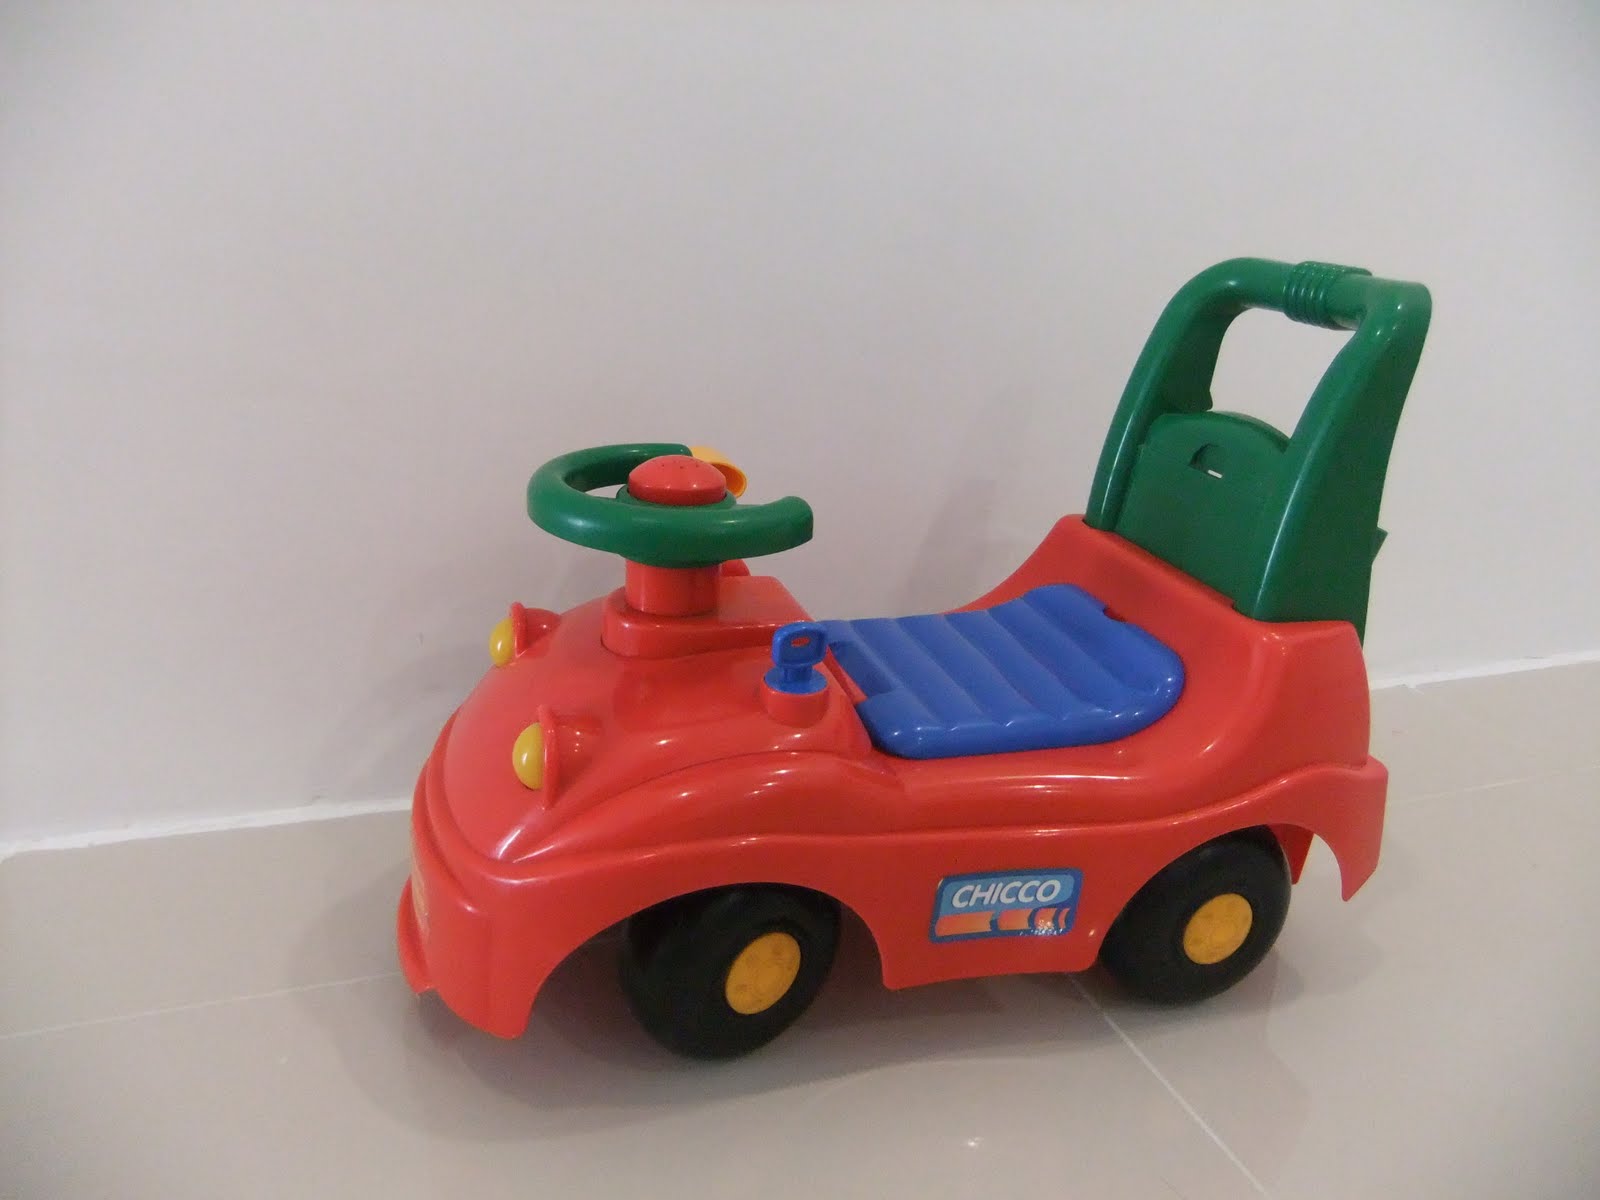 Online Baby & Children's Toys Shop : Huiwearn Kids Store: Pre-loved Chicco Play N Ride Car